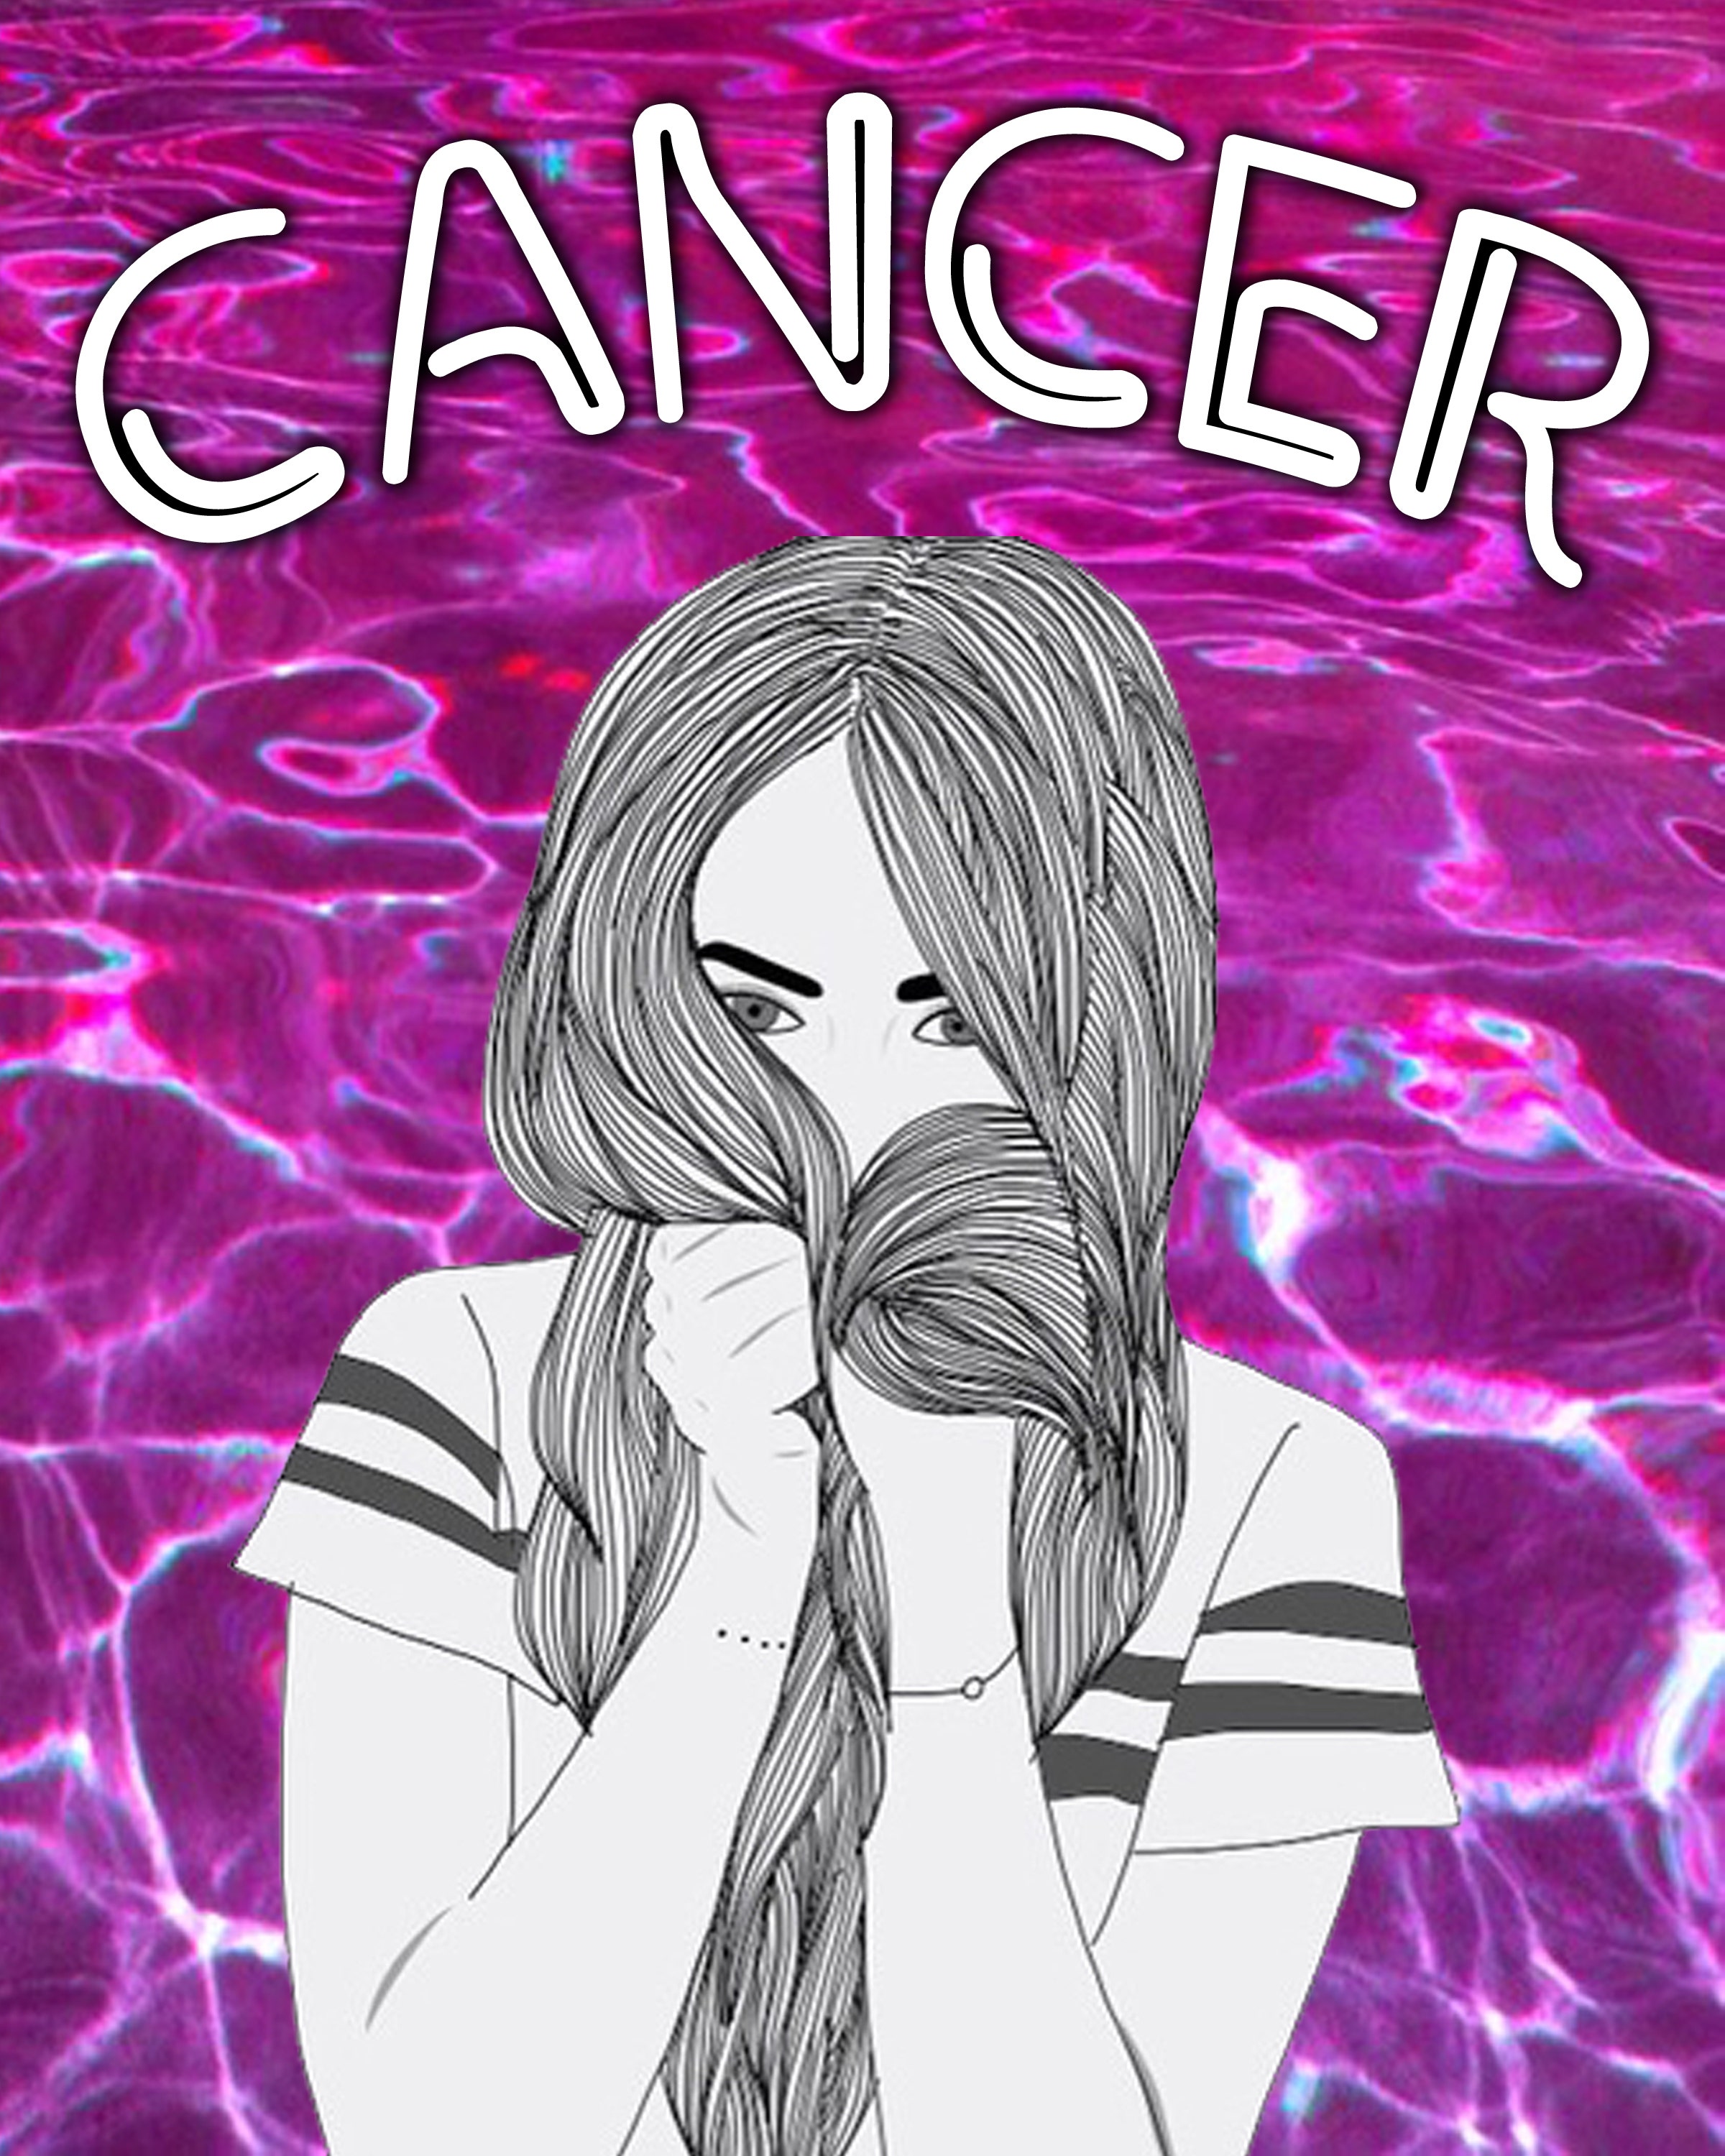 Cancer zodiac sign why he wants you back